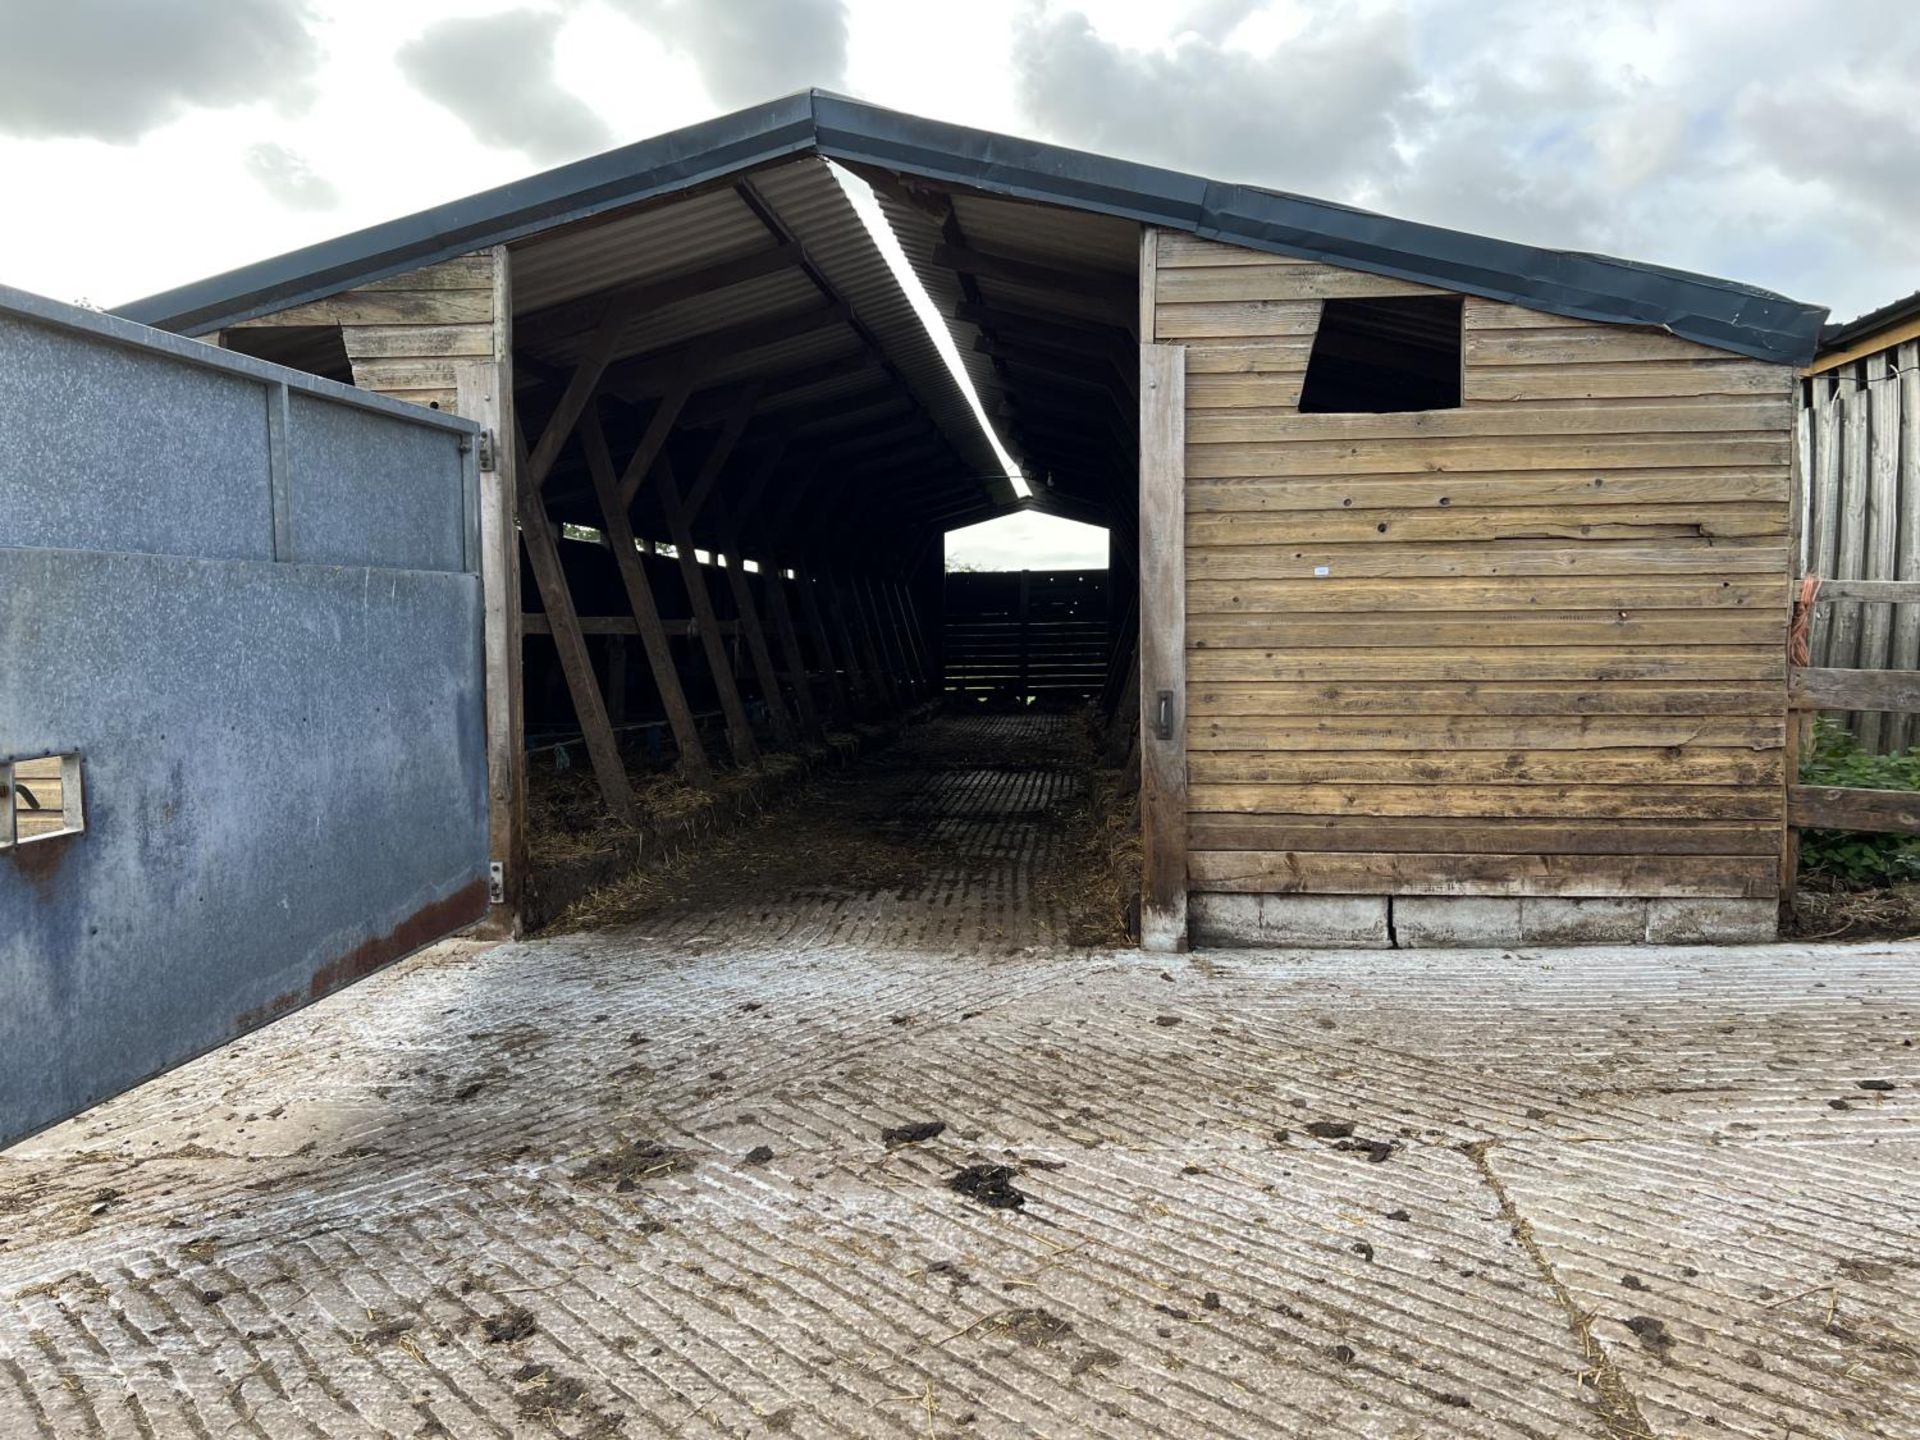 CHALLOW 26 STALL COW KENNEL - 3 WEEKS TO REMOVE. (SHEETED DOOR LOT 206) + VAT